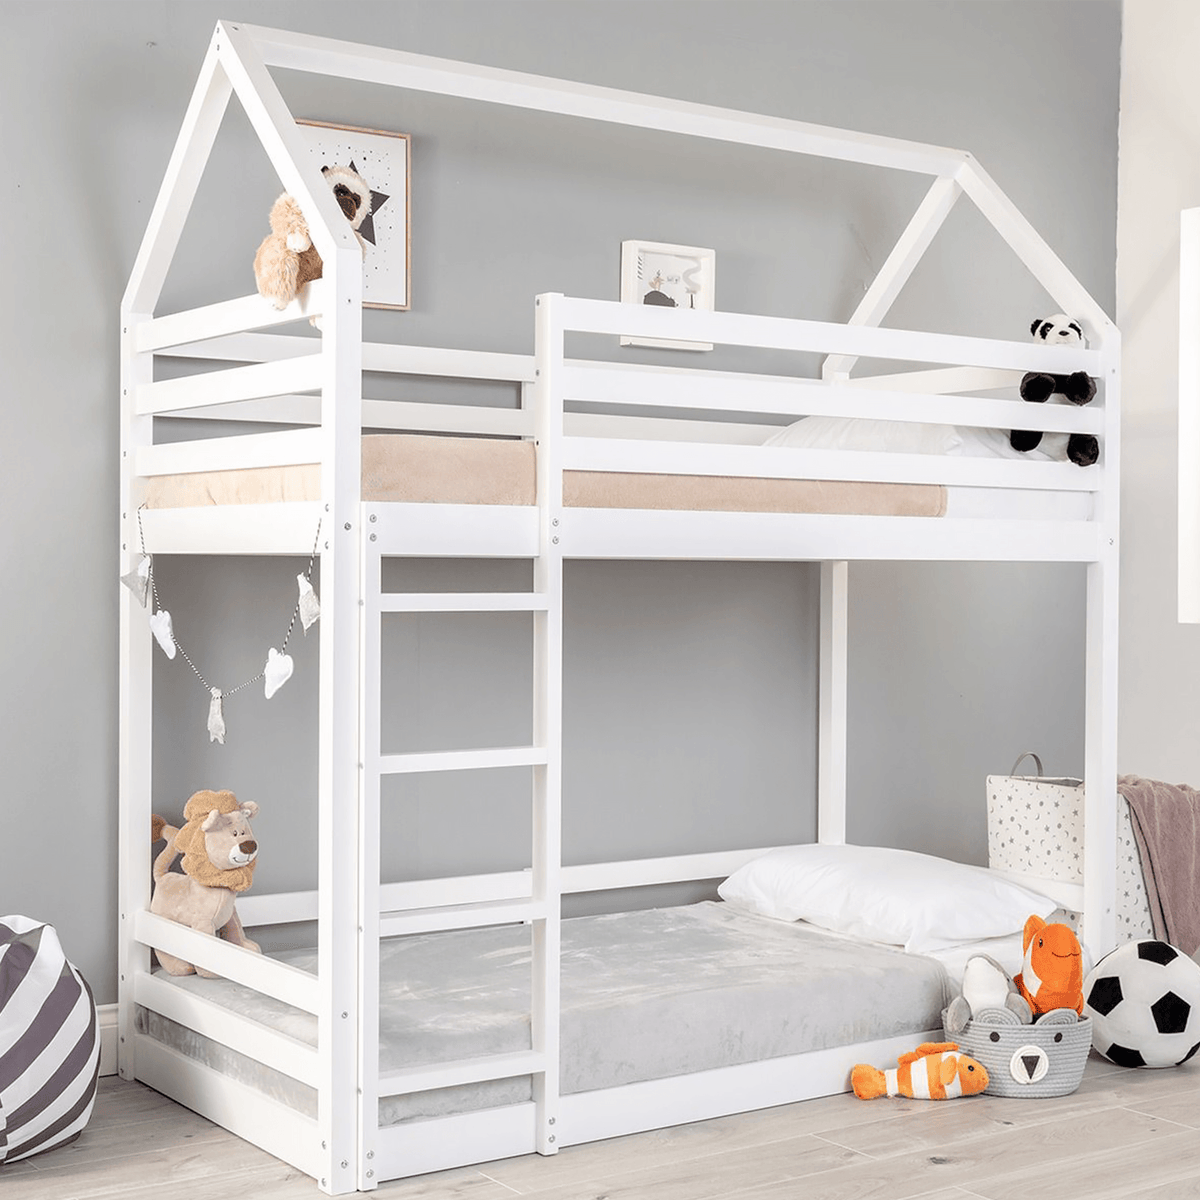 Flair Play House Bunk Bed Frame White Pine Wood